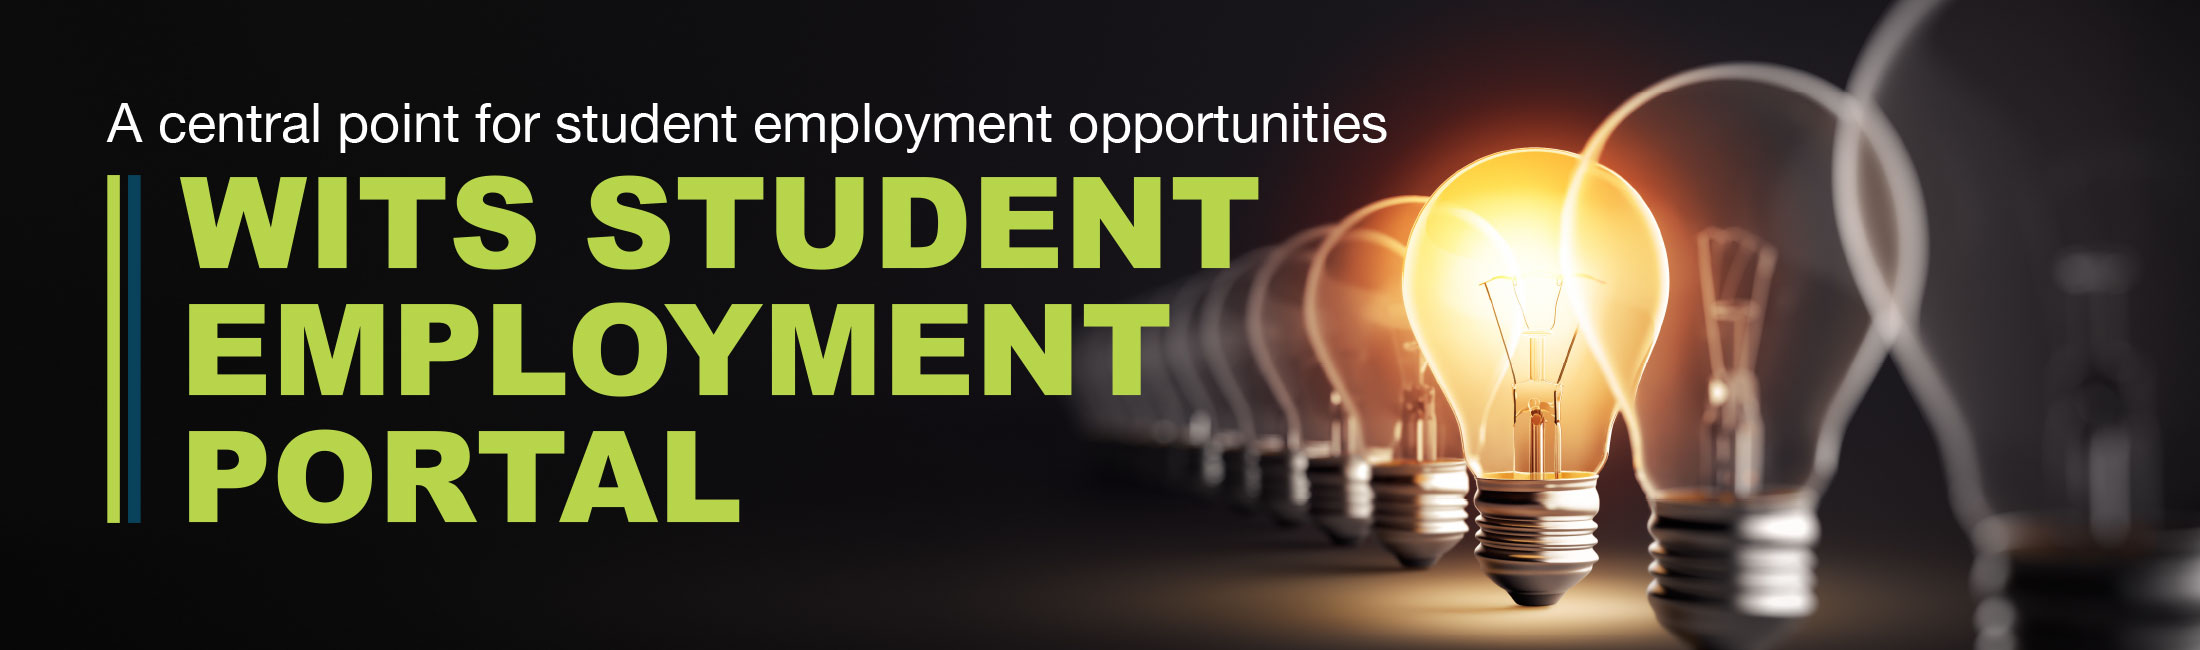 Banner with link to the student employment portal